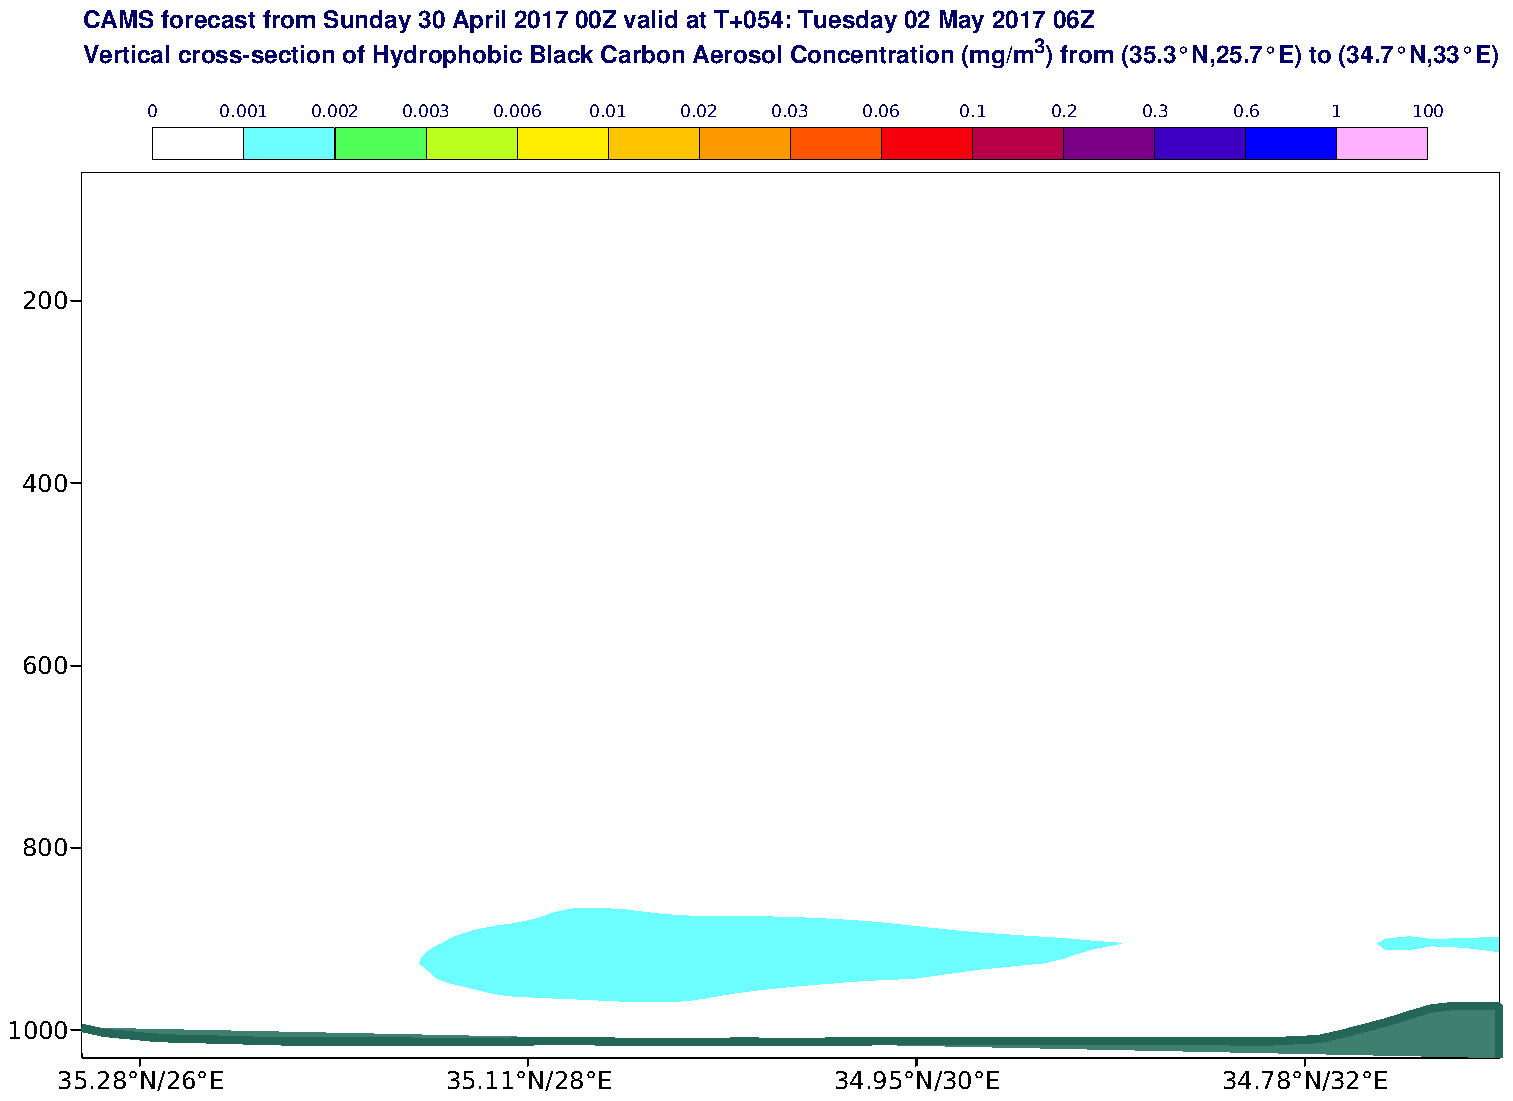 Vertical cross-section of Hydrophobic Black Carbon Aerosol Concentration (mg/m3) valid at T54 - 2017-05-02 06:00